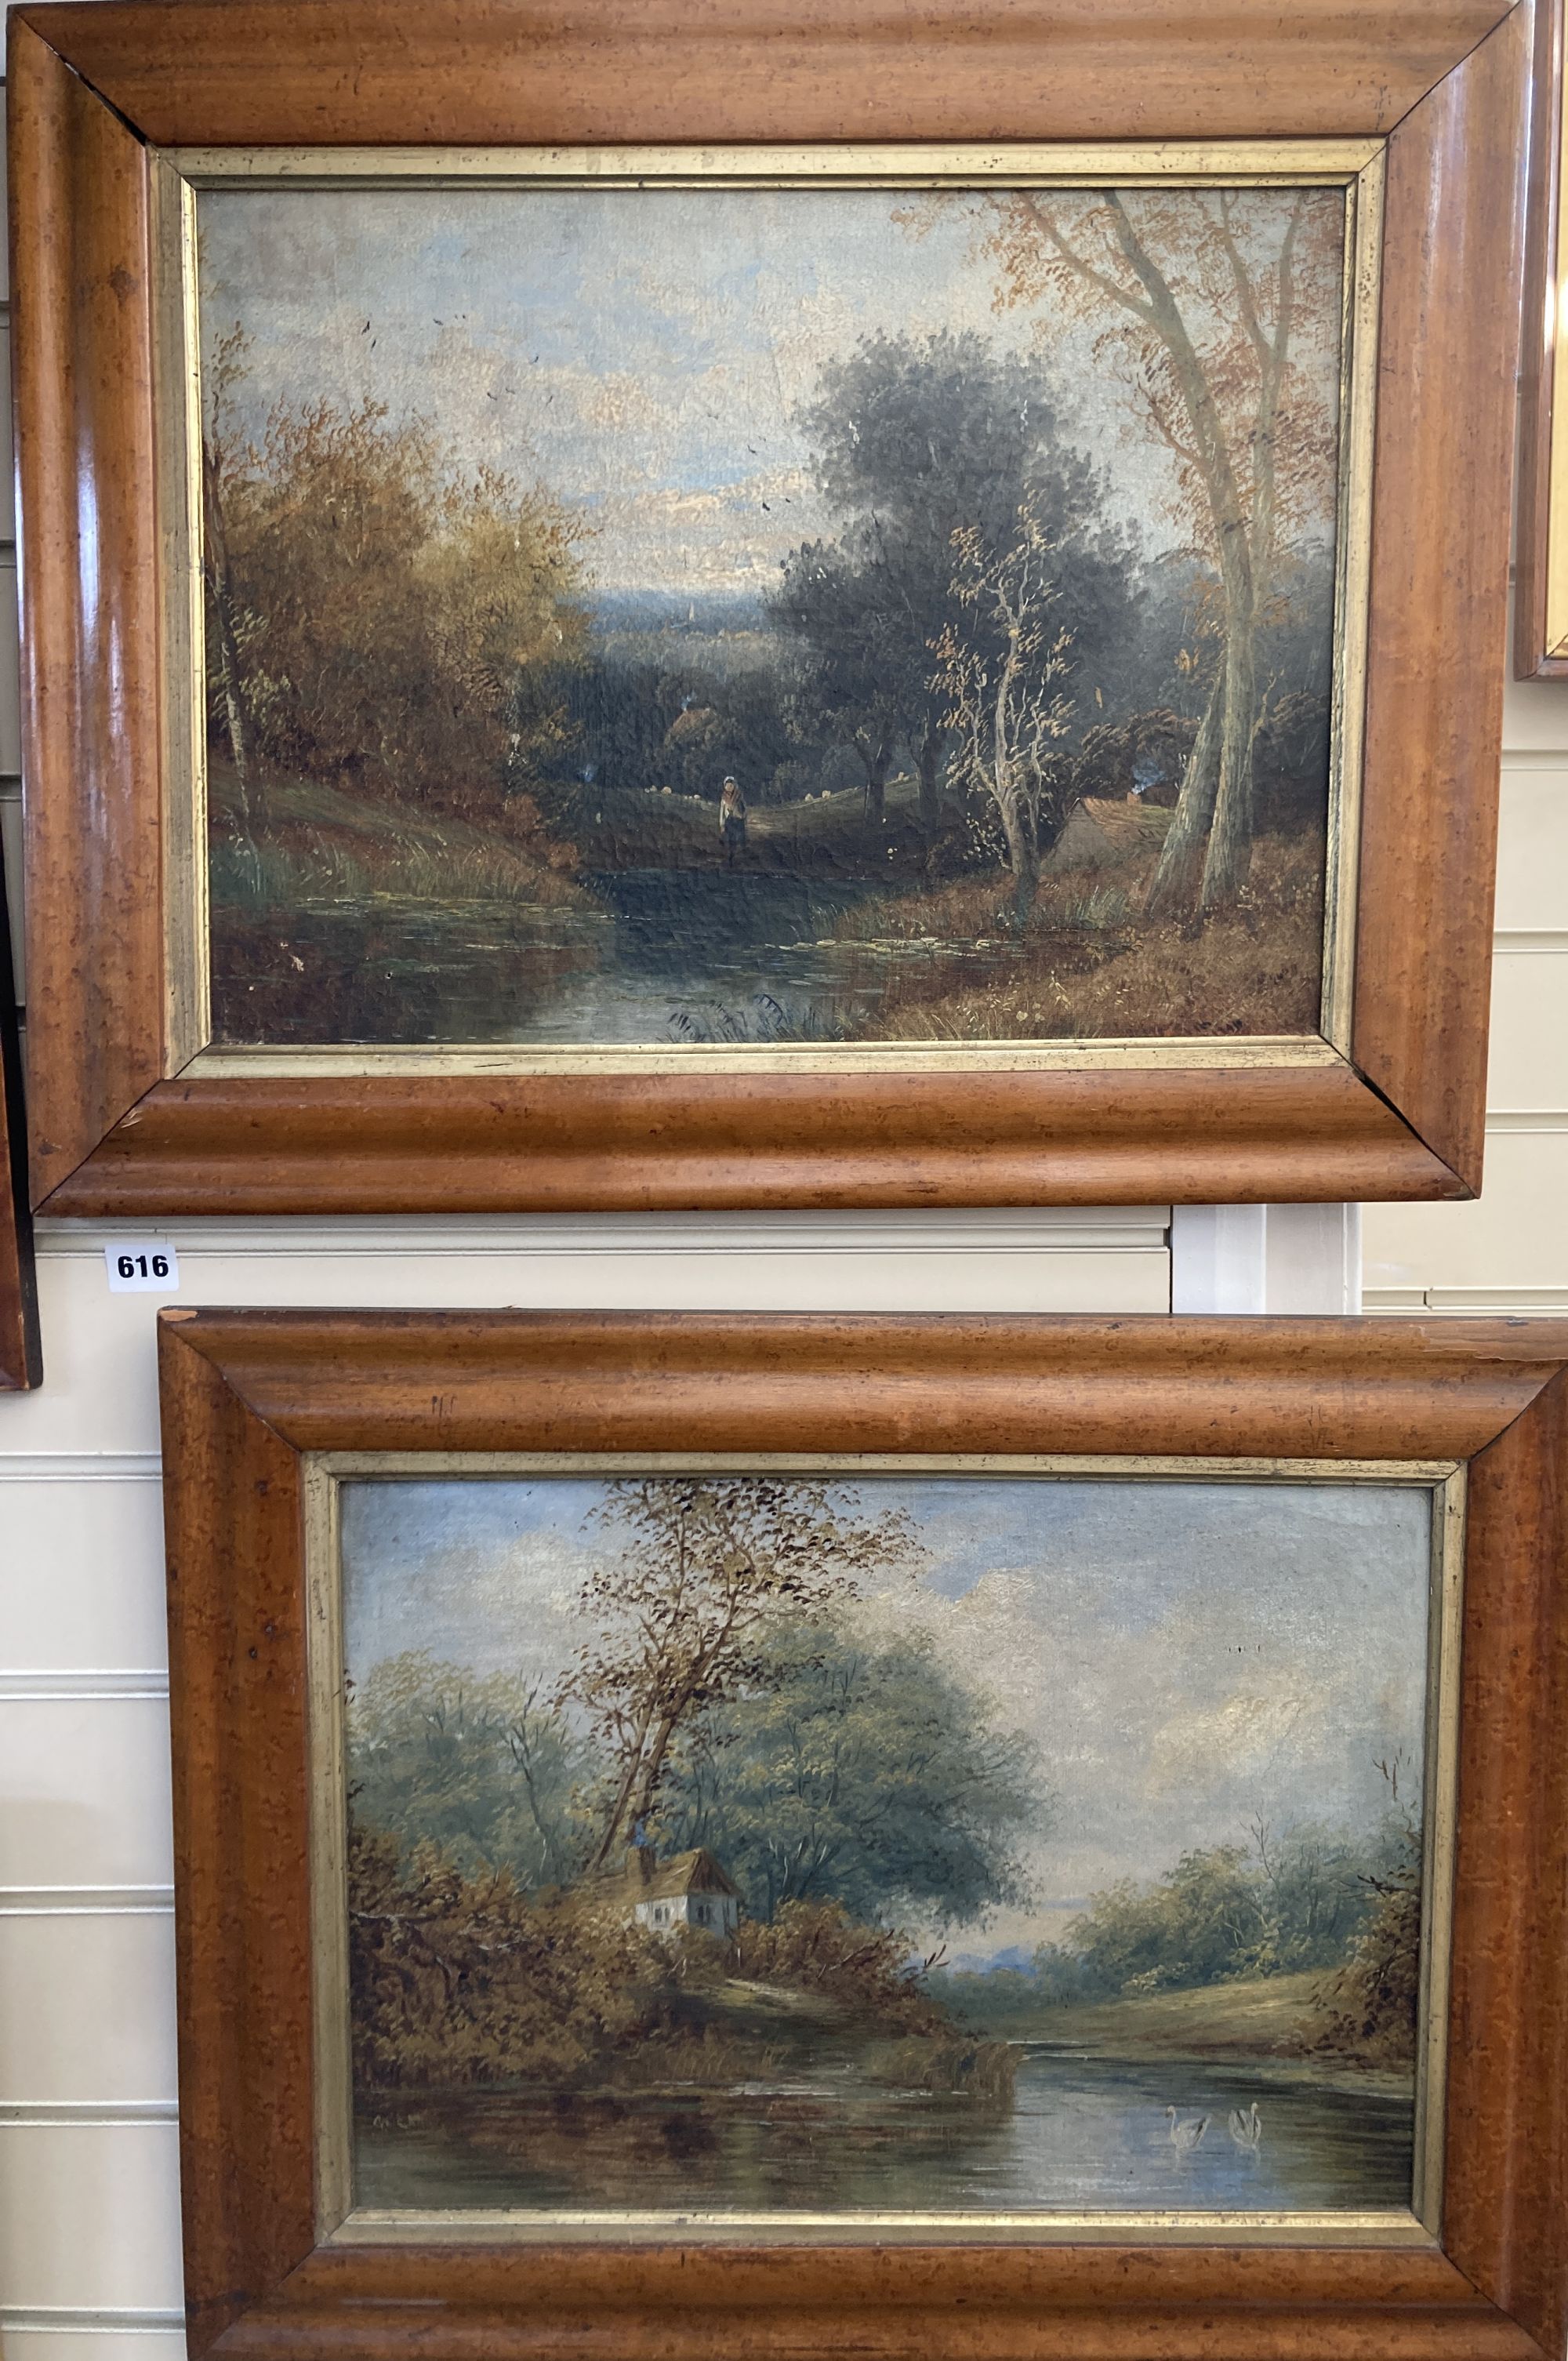 G.C. Earp, pair of oils on canvas, River landscapes, one signed, 34 x 48cm, maple framed